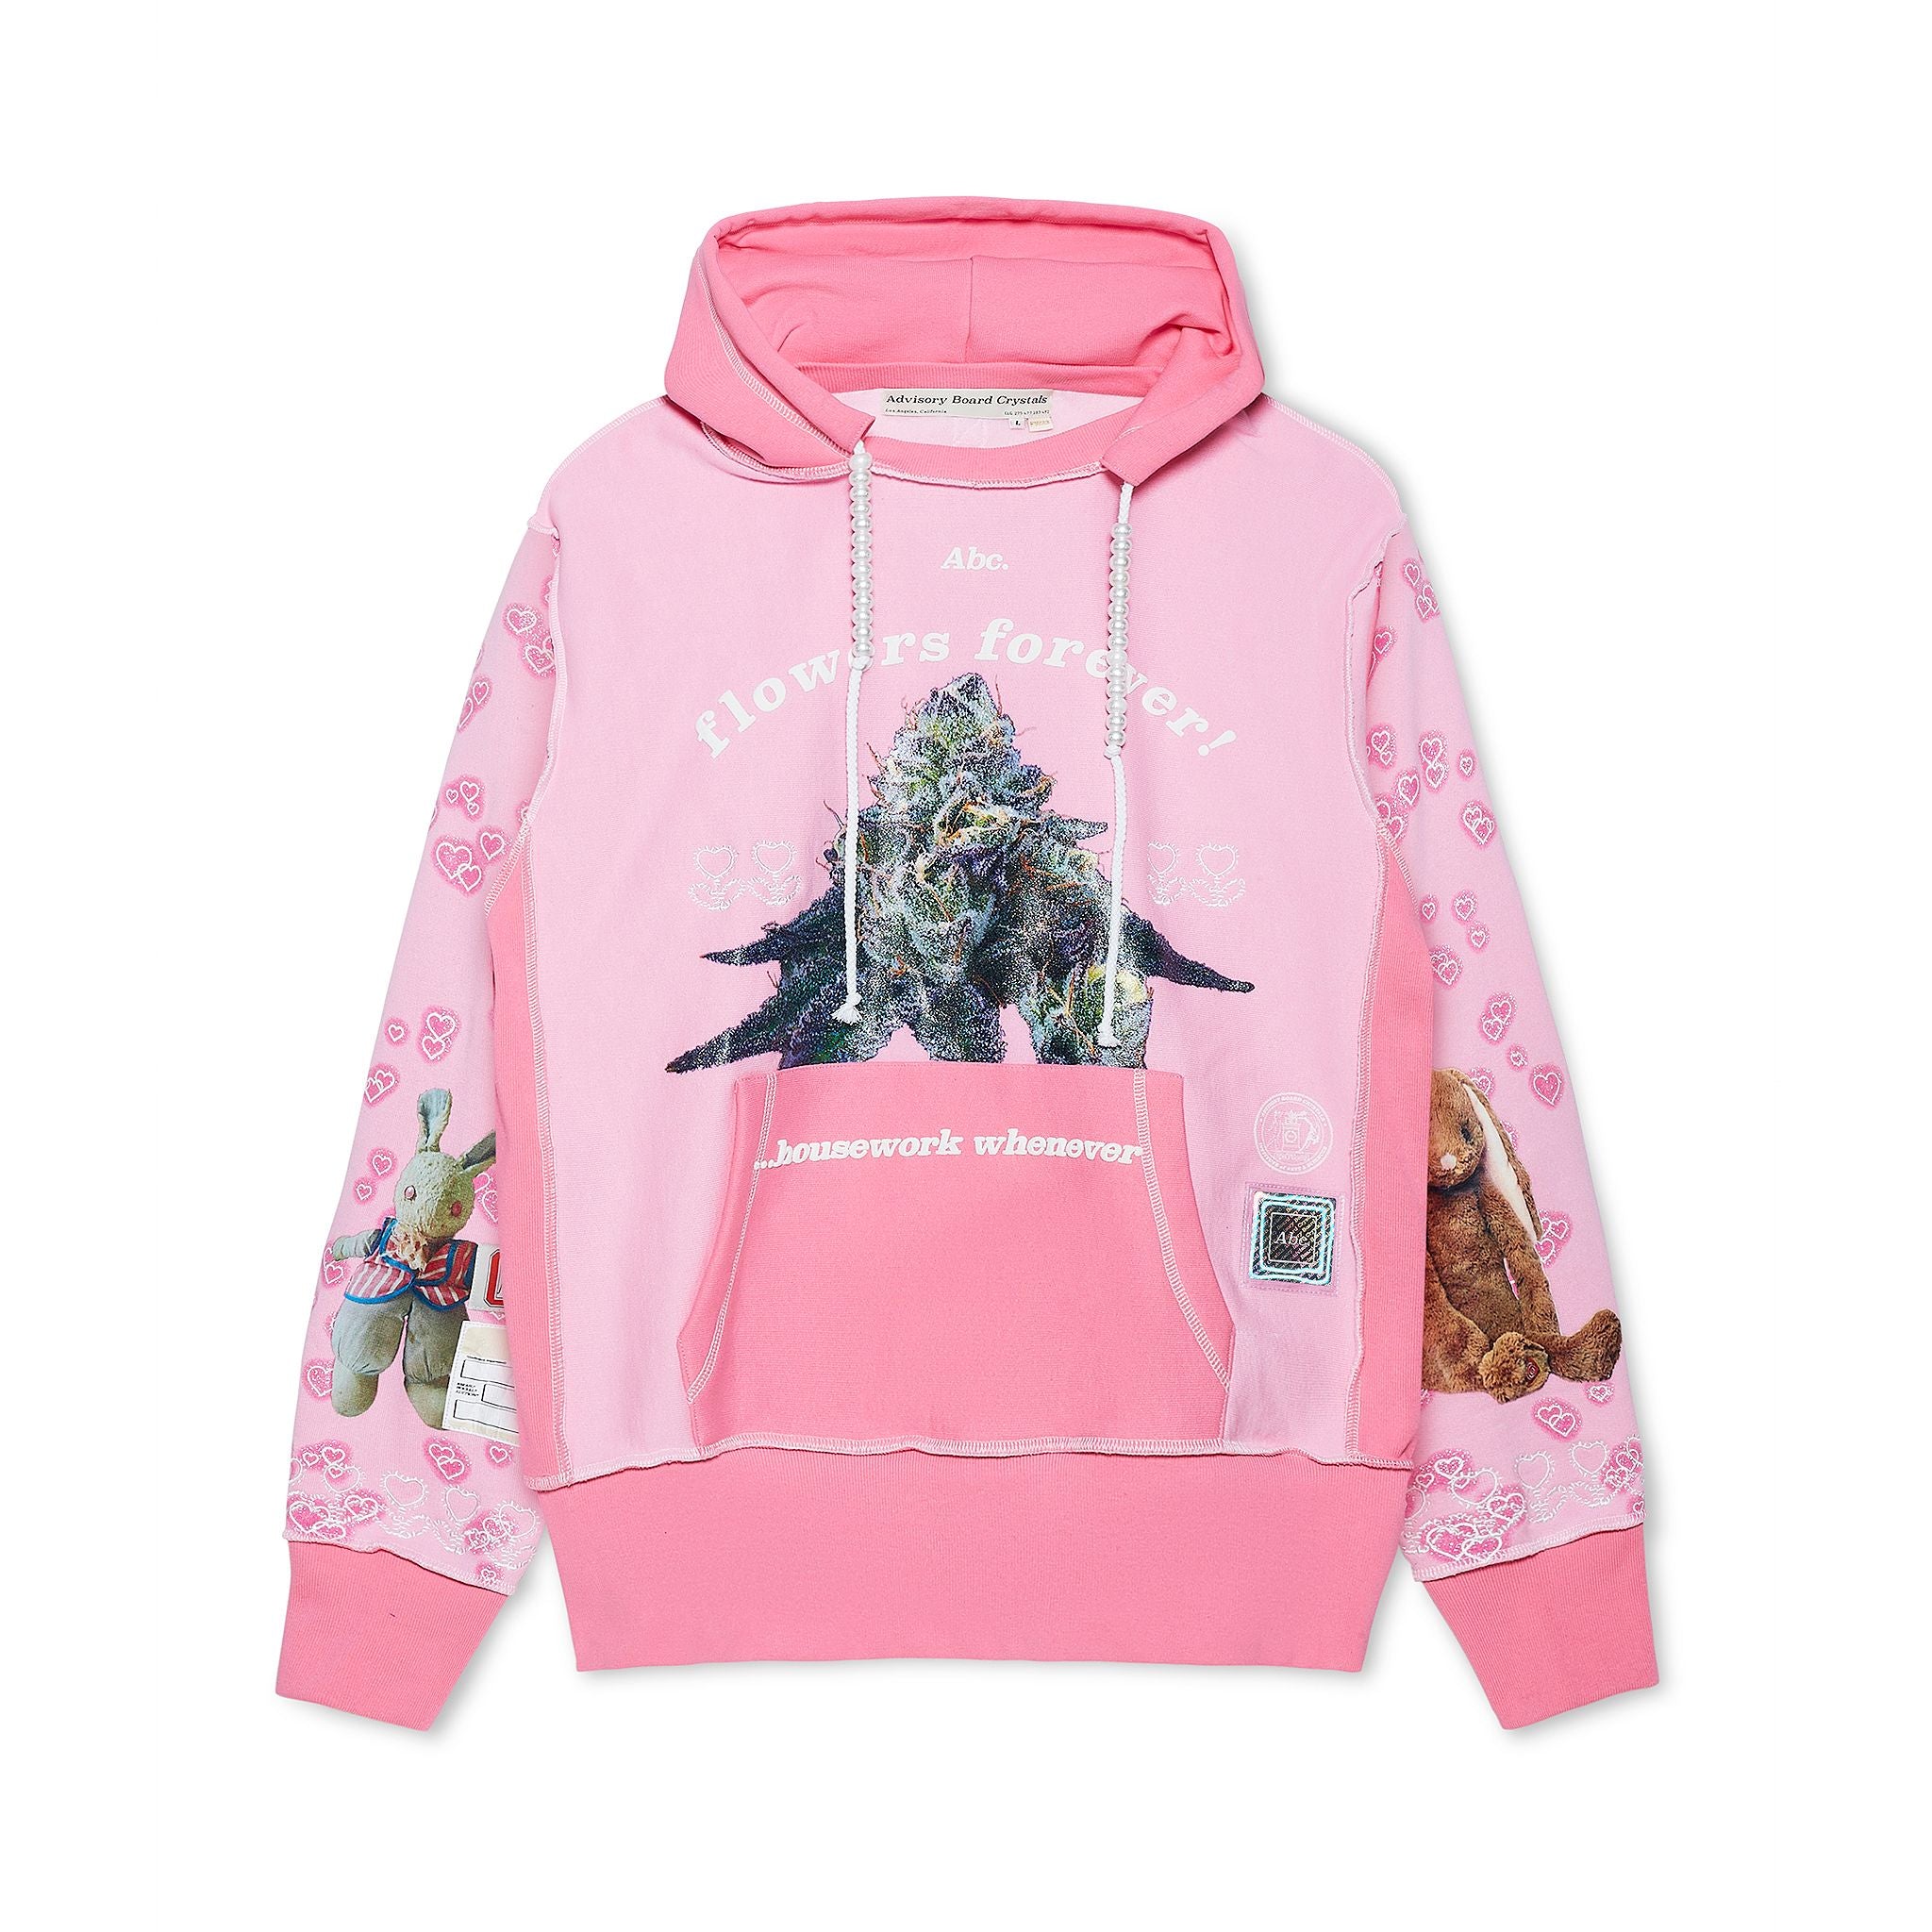 Abc. Flowers Forever Hoodie